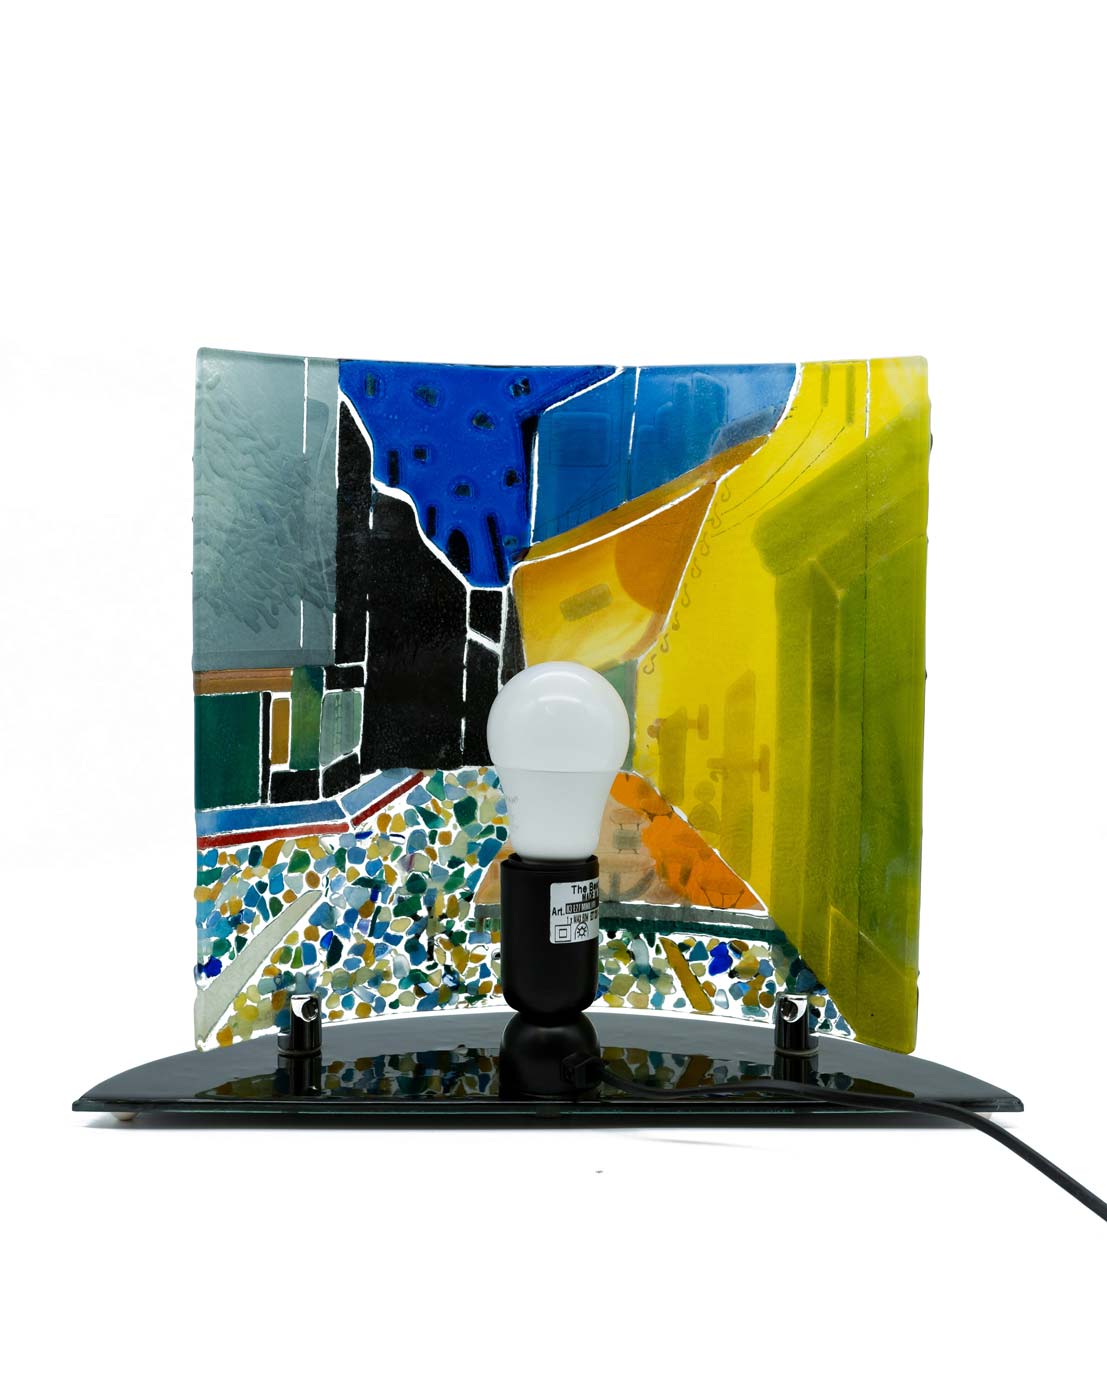 Sebino Glass | Curved Lamp | "The Café terrace at night" Collection